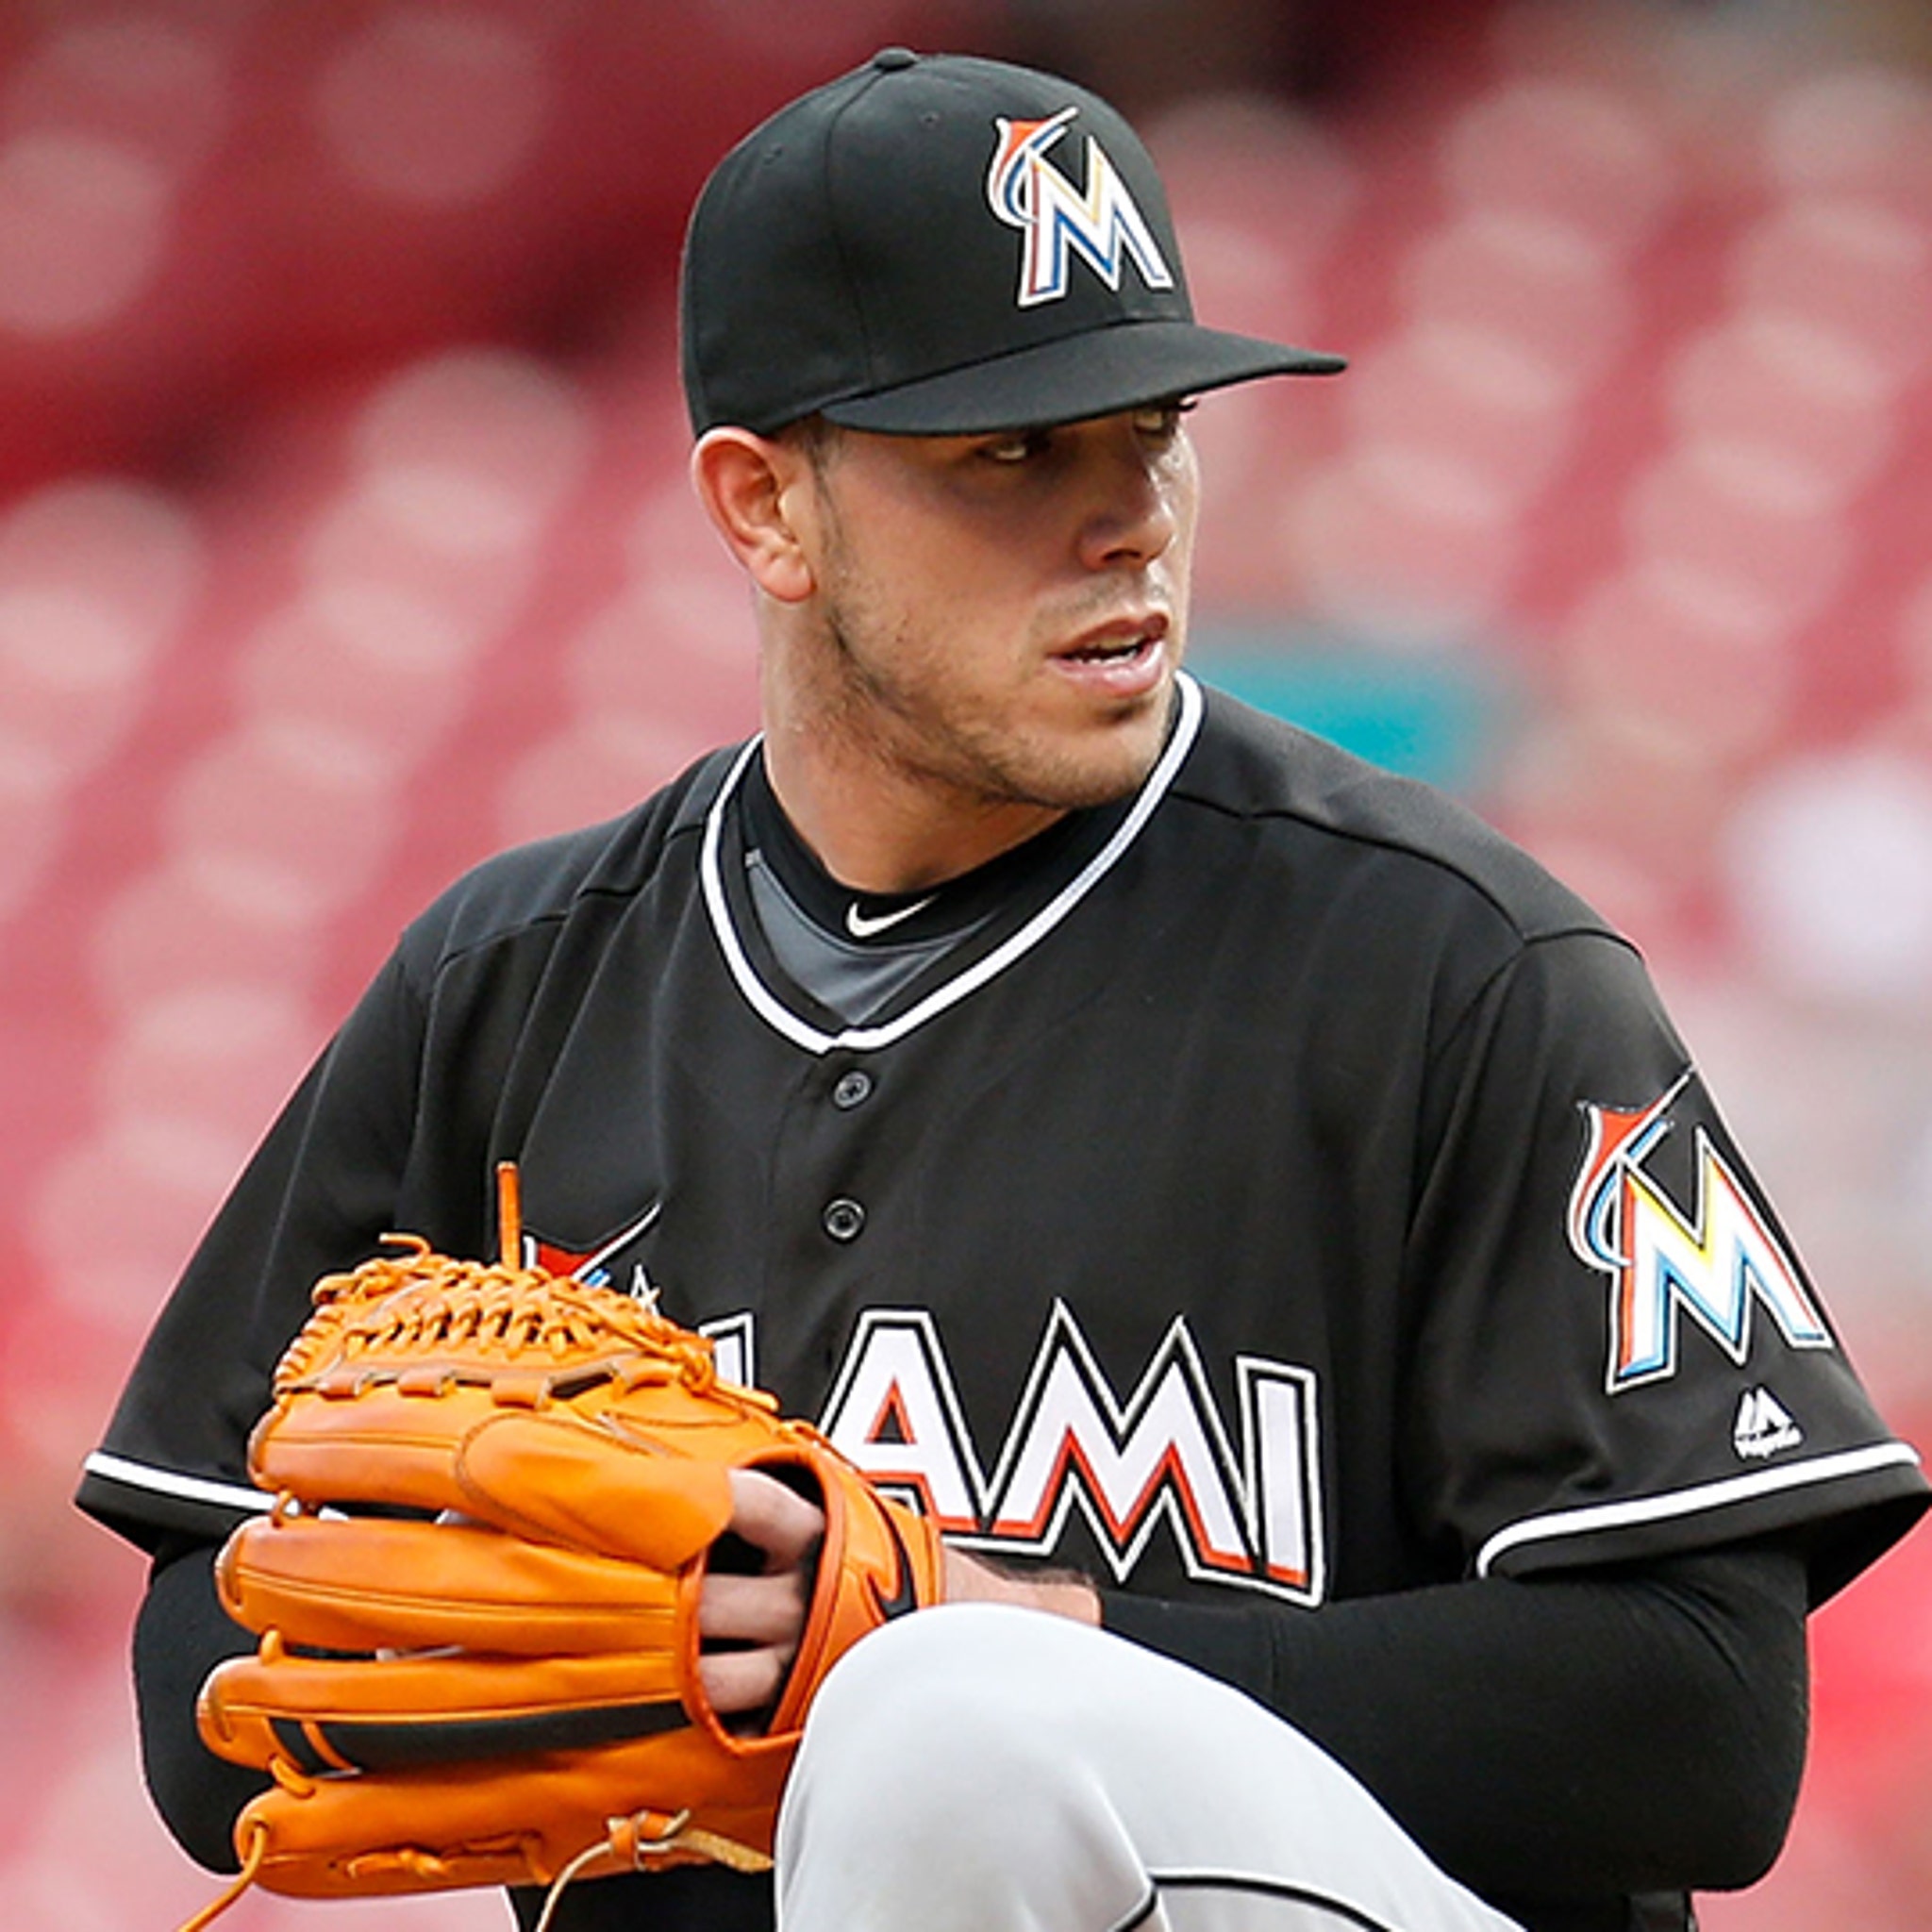 Death of Marlins' Jose Fernandez hits A's clubhouse hard – East Bay Times